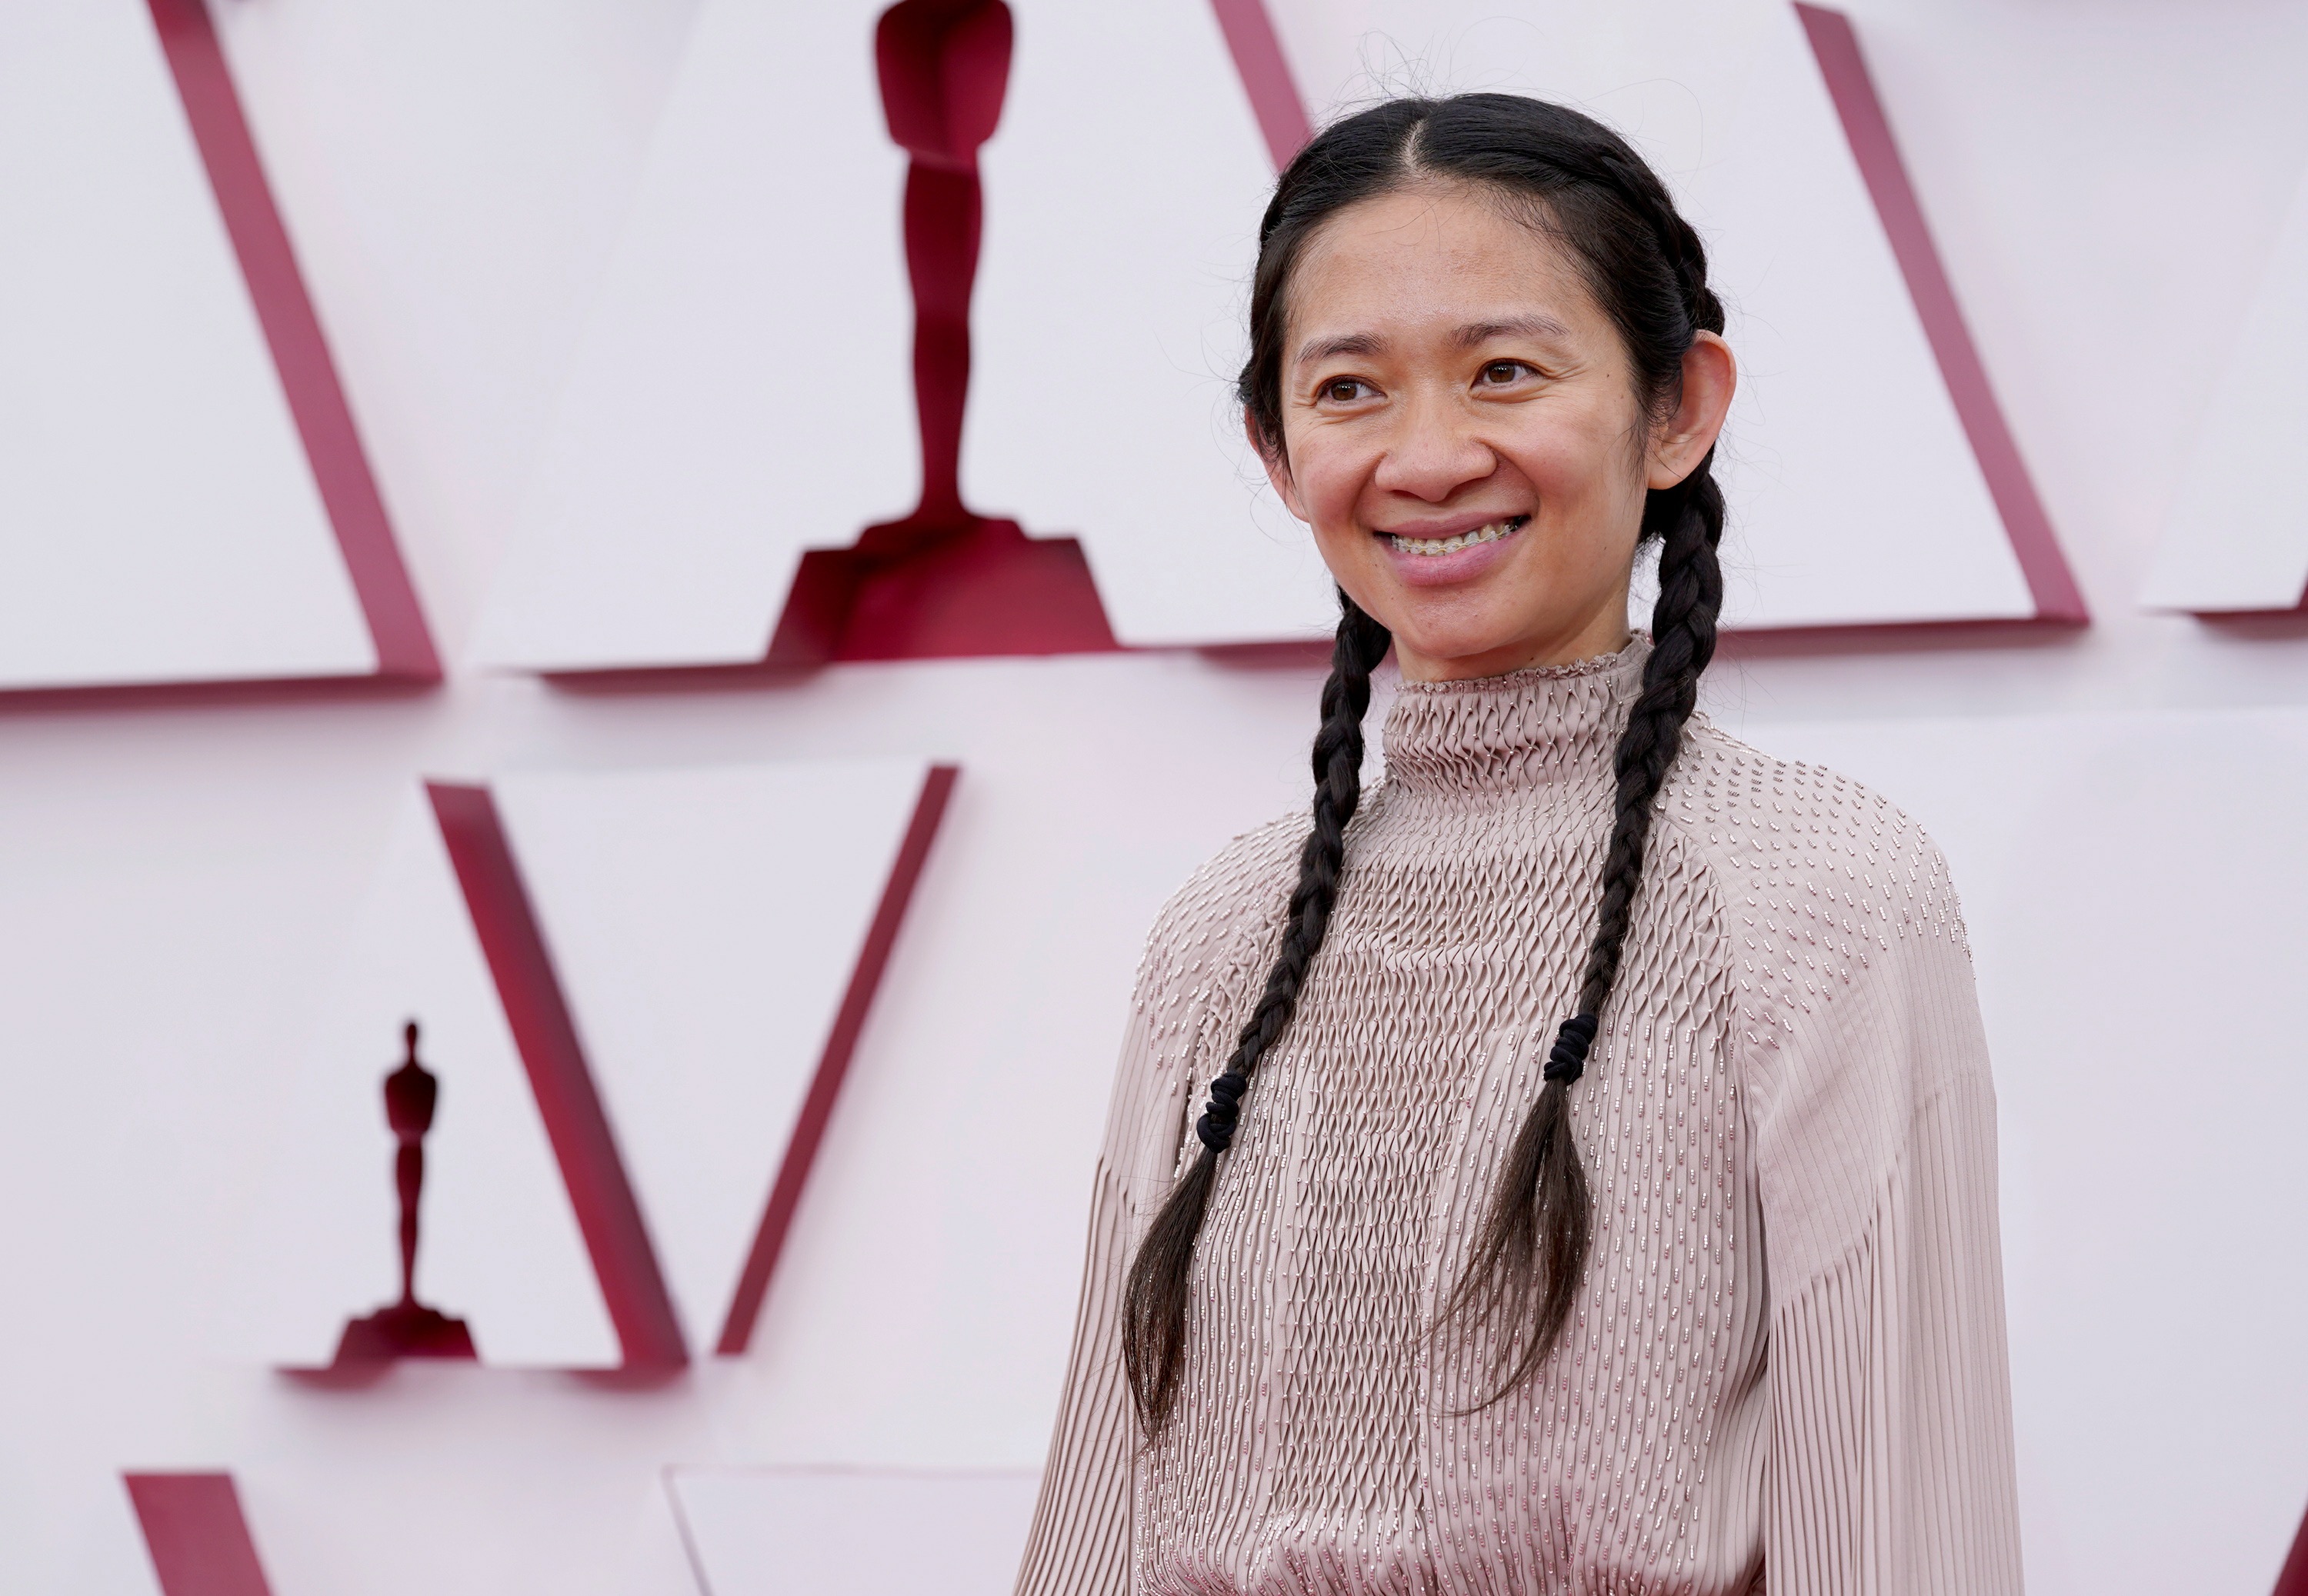 Chloé Zhao Wins the Oscar for Best Director for "Nomadland"